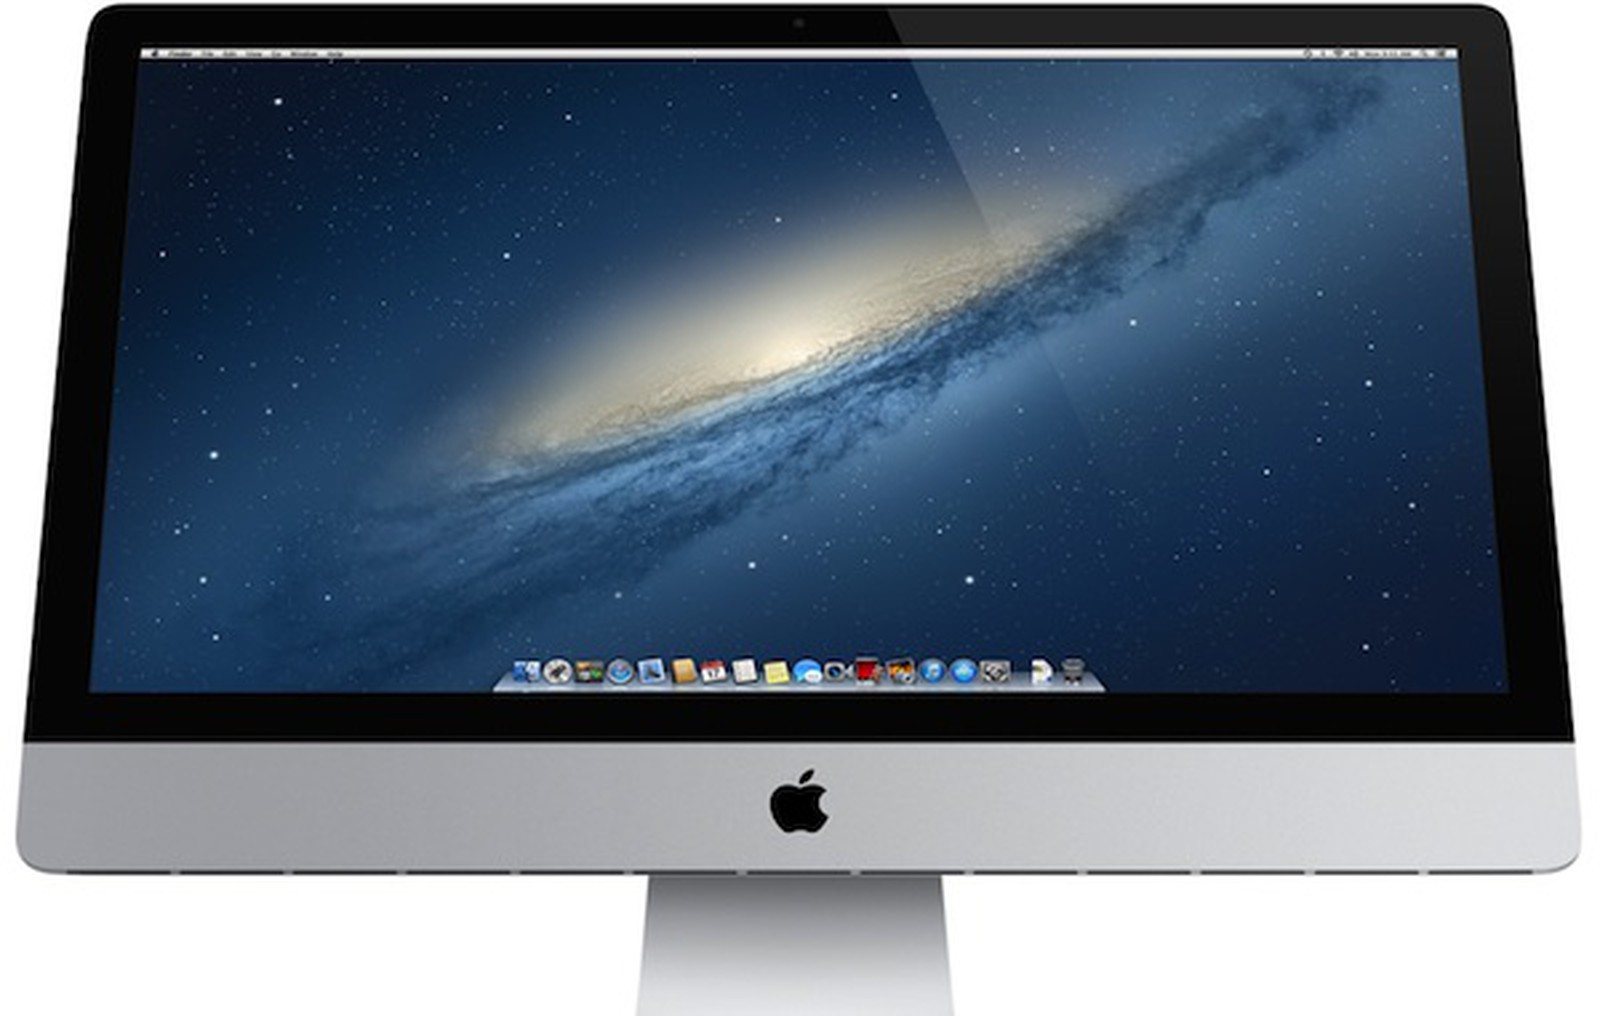 imac 27 late 2013 hard drive replacement